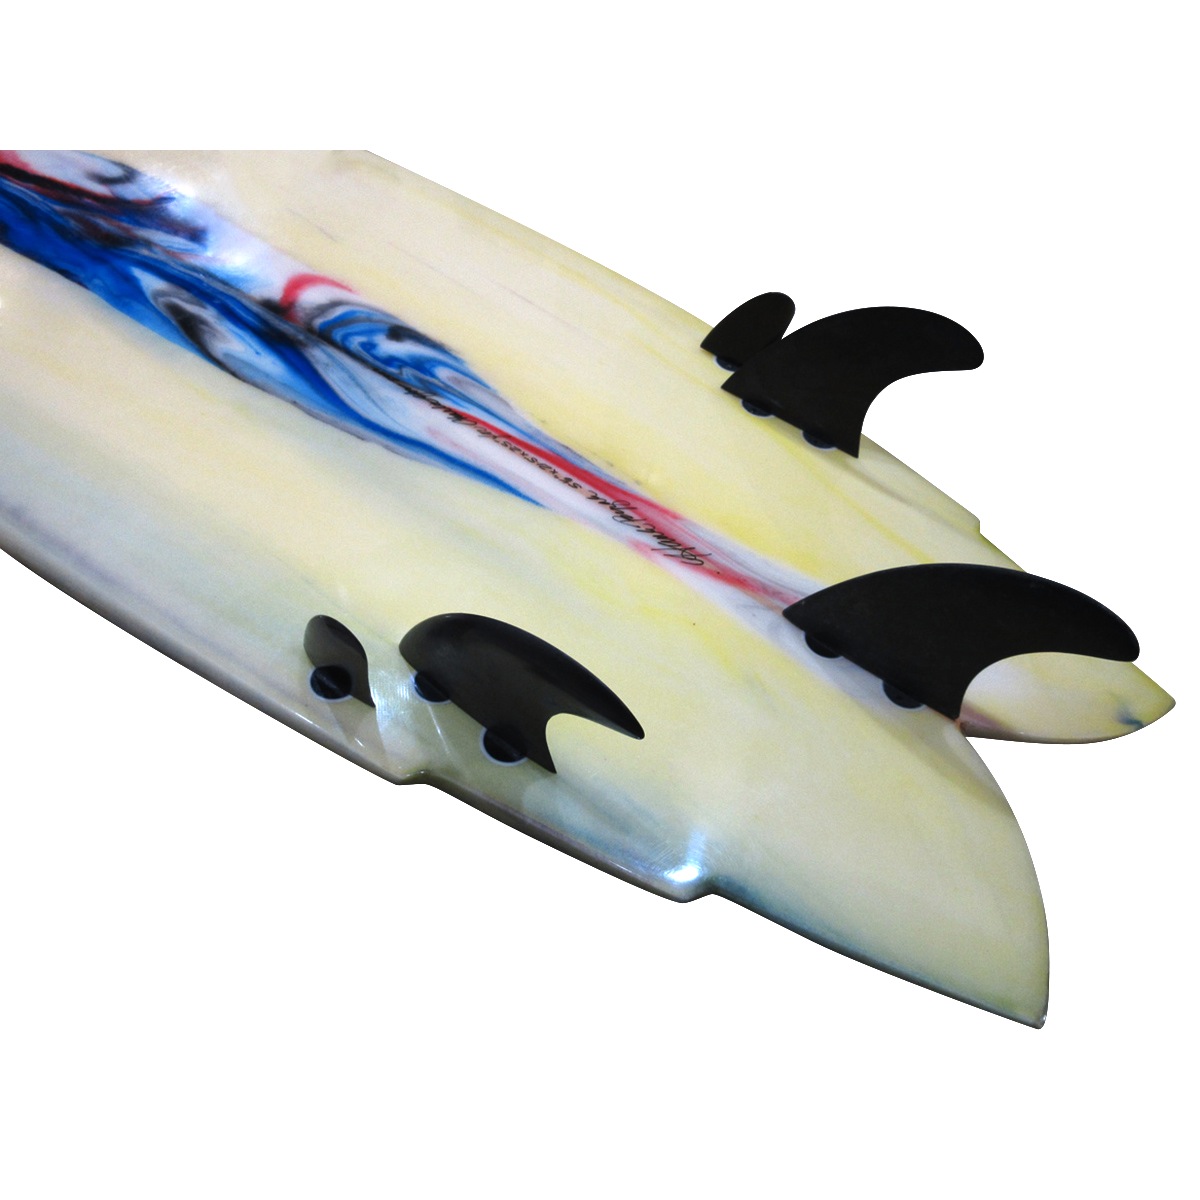 PURE FUN SURFBOARDS / DOUBLE WING SWALLOW 5`6